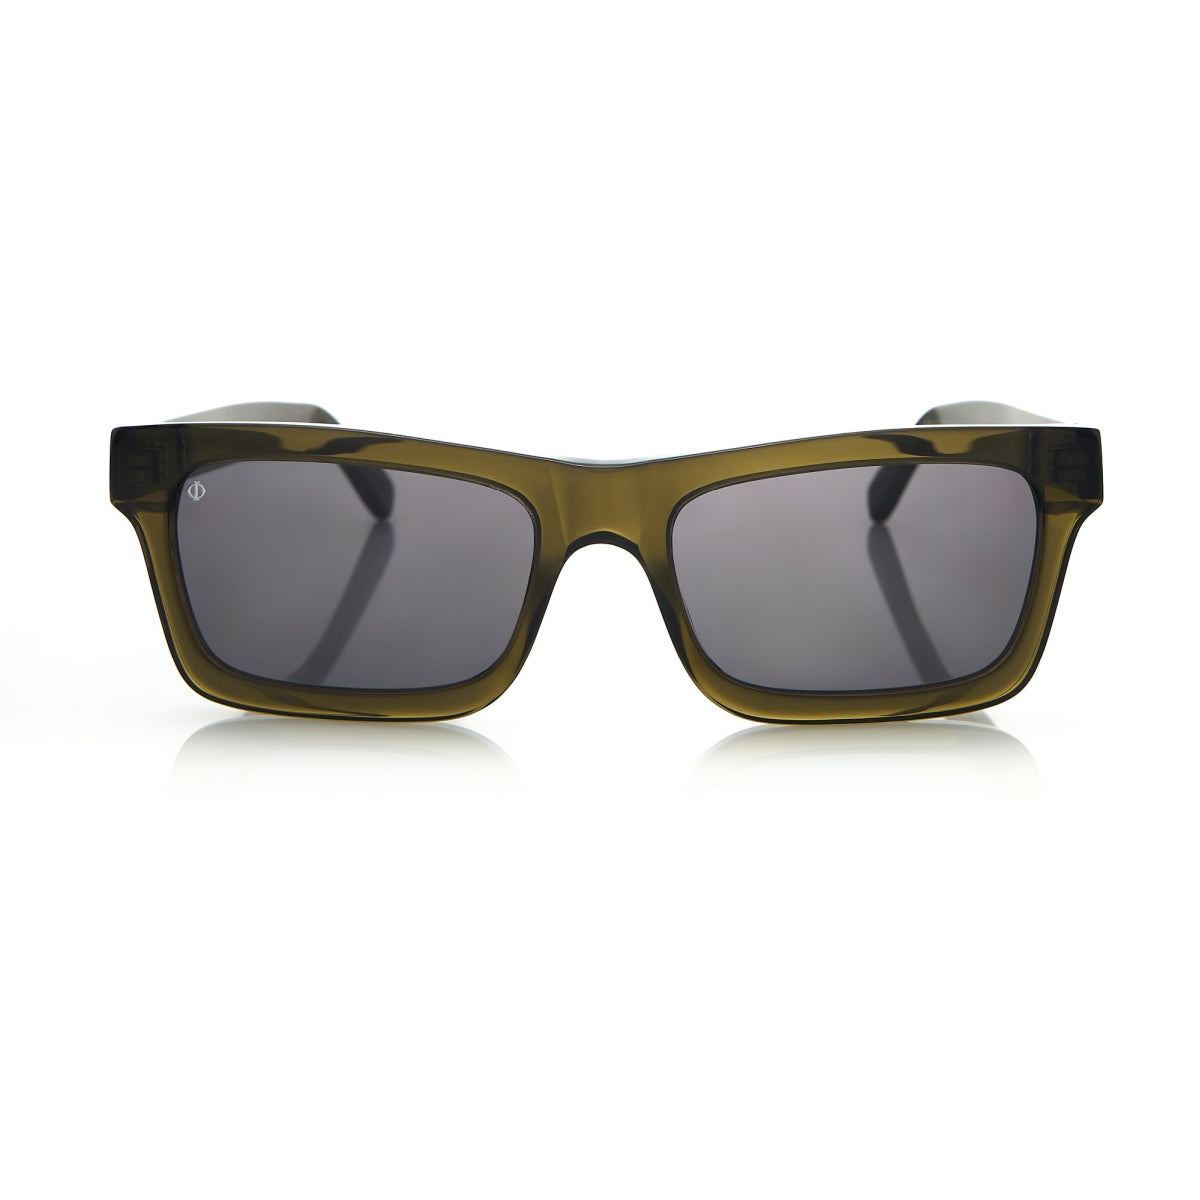 KYTHERA IN OLIVE GREEN WITH SHADE GREY LENSES